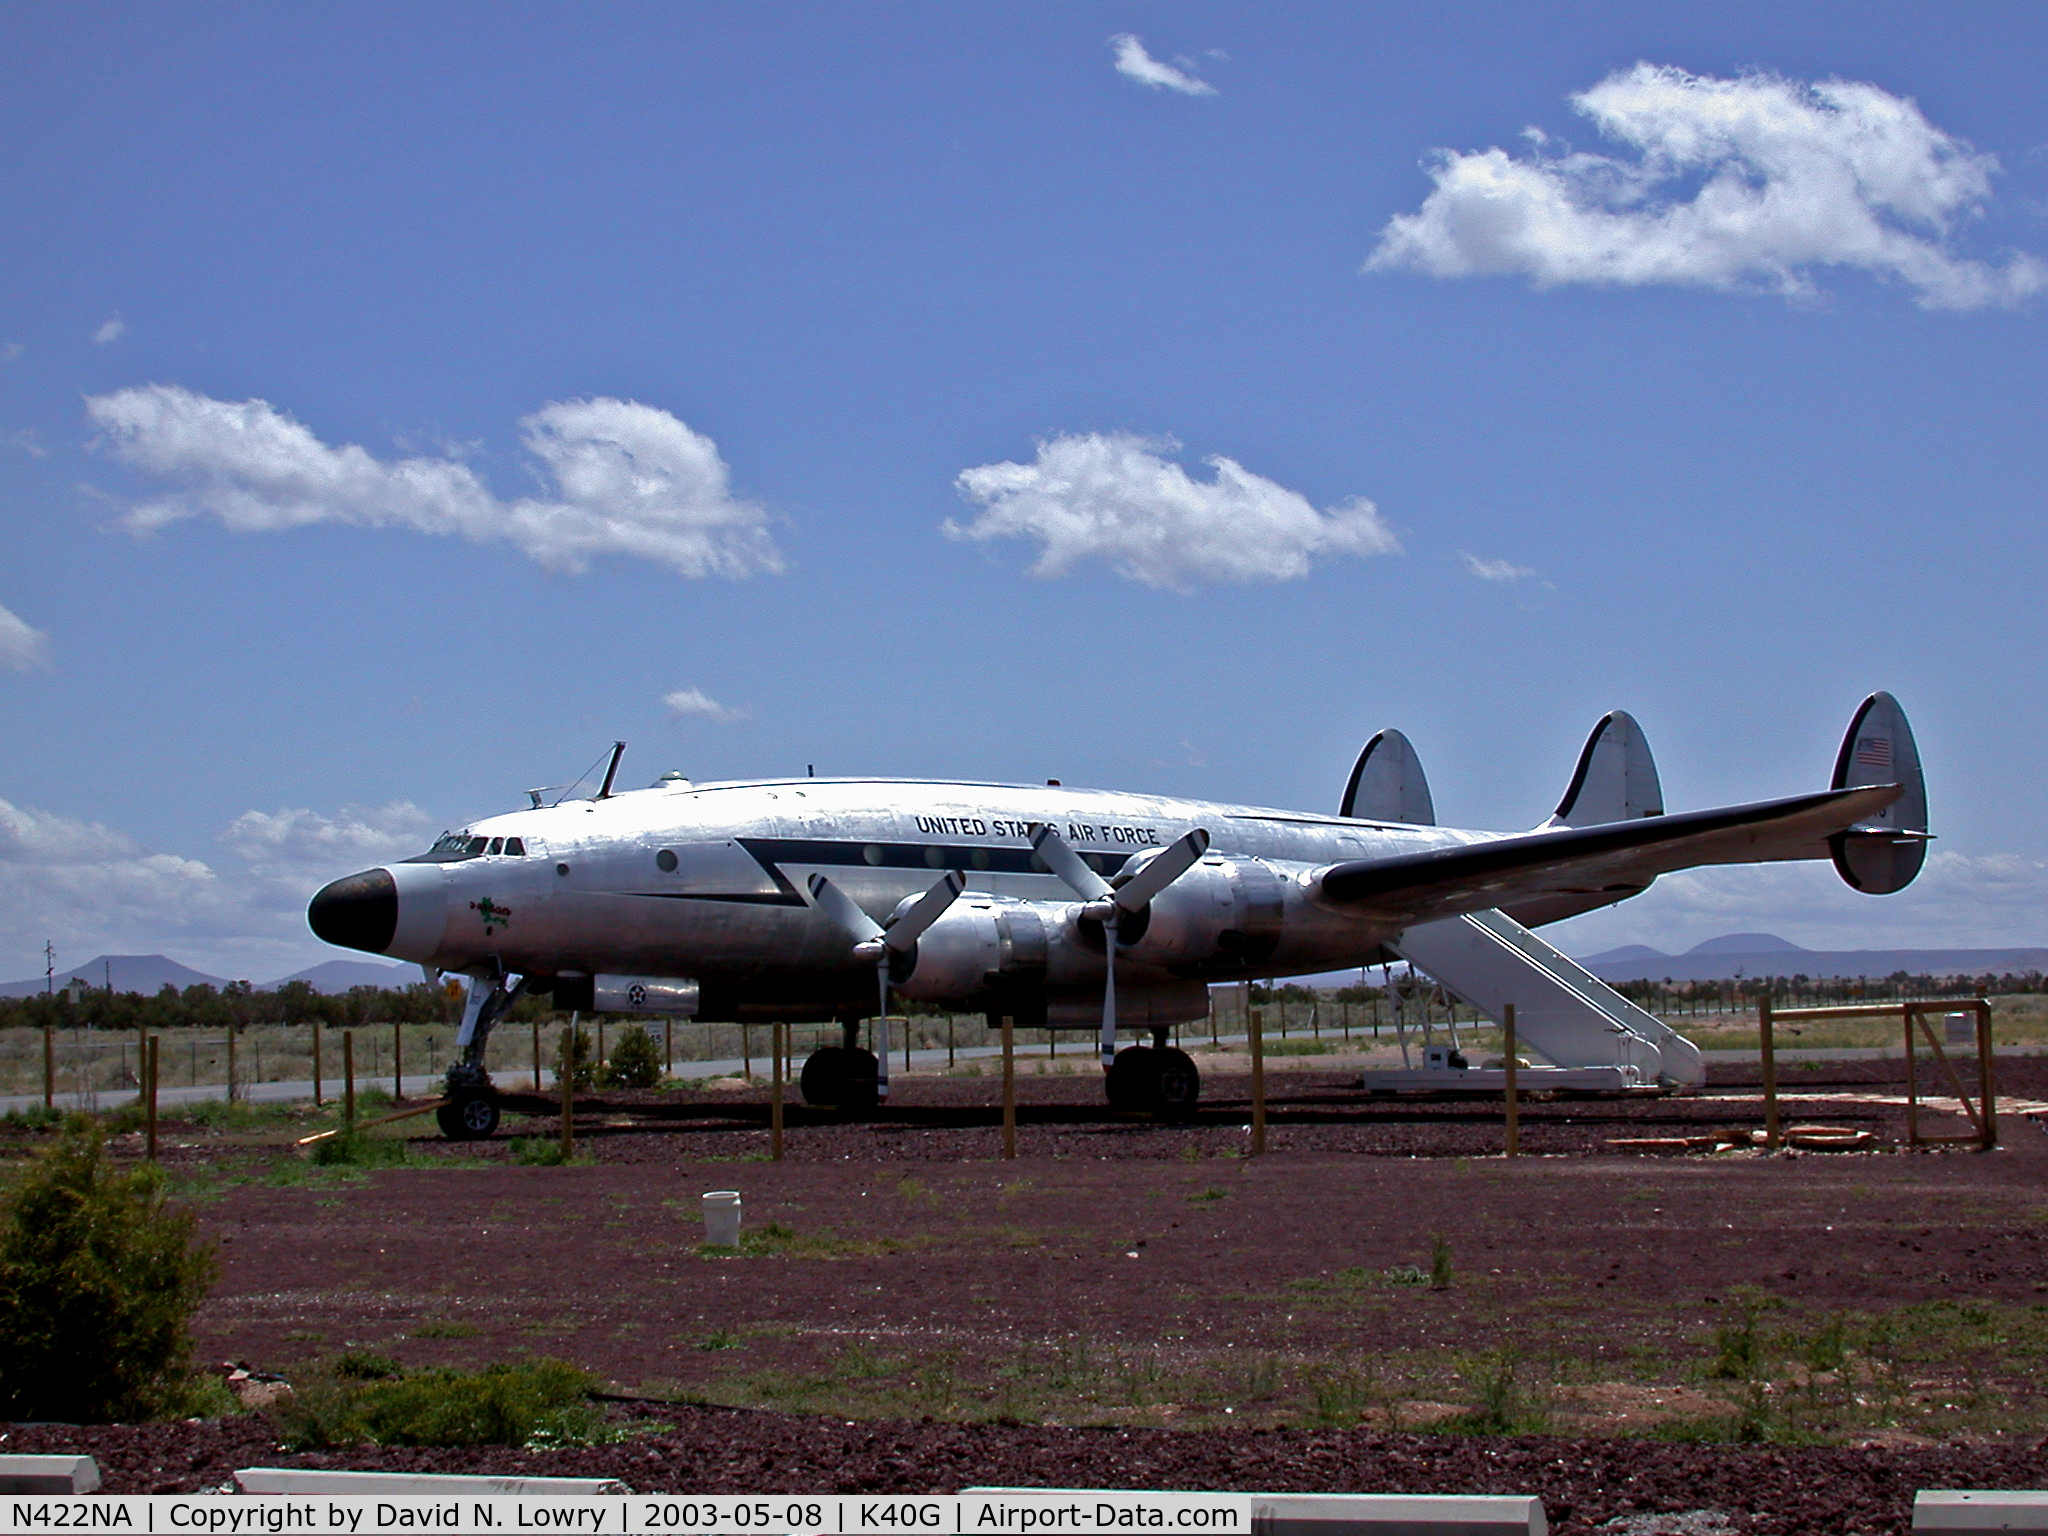 N422NA, 1948 Lockheed C-121A Constellation C/N 48-613 (2605), at the Planes of Fame Museum.